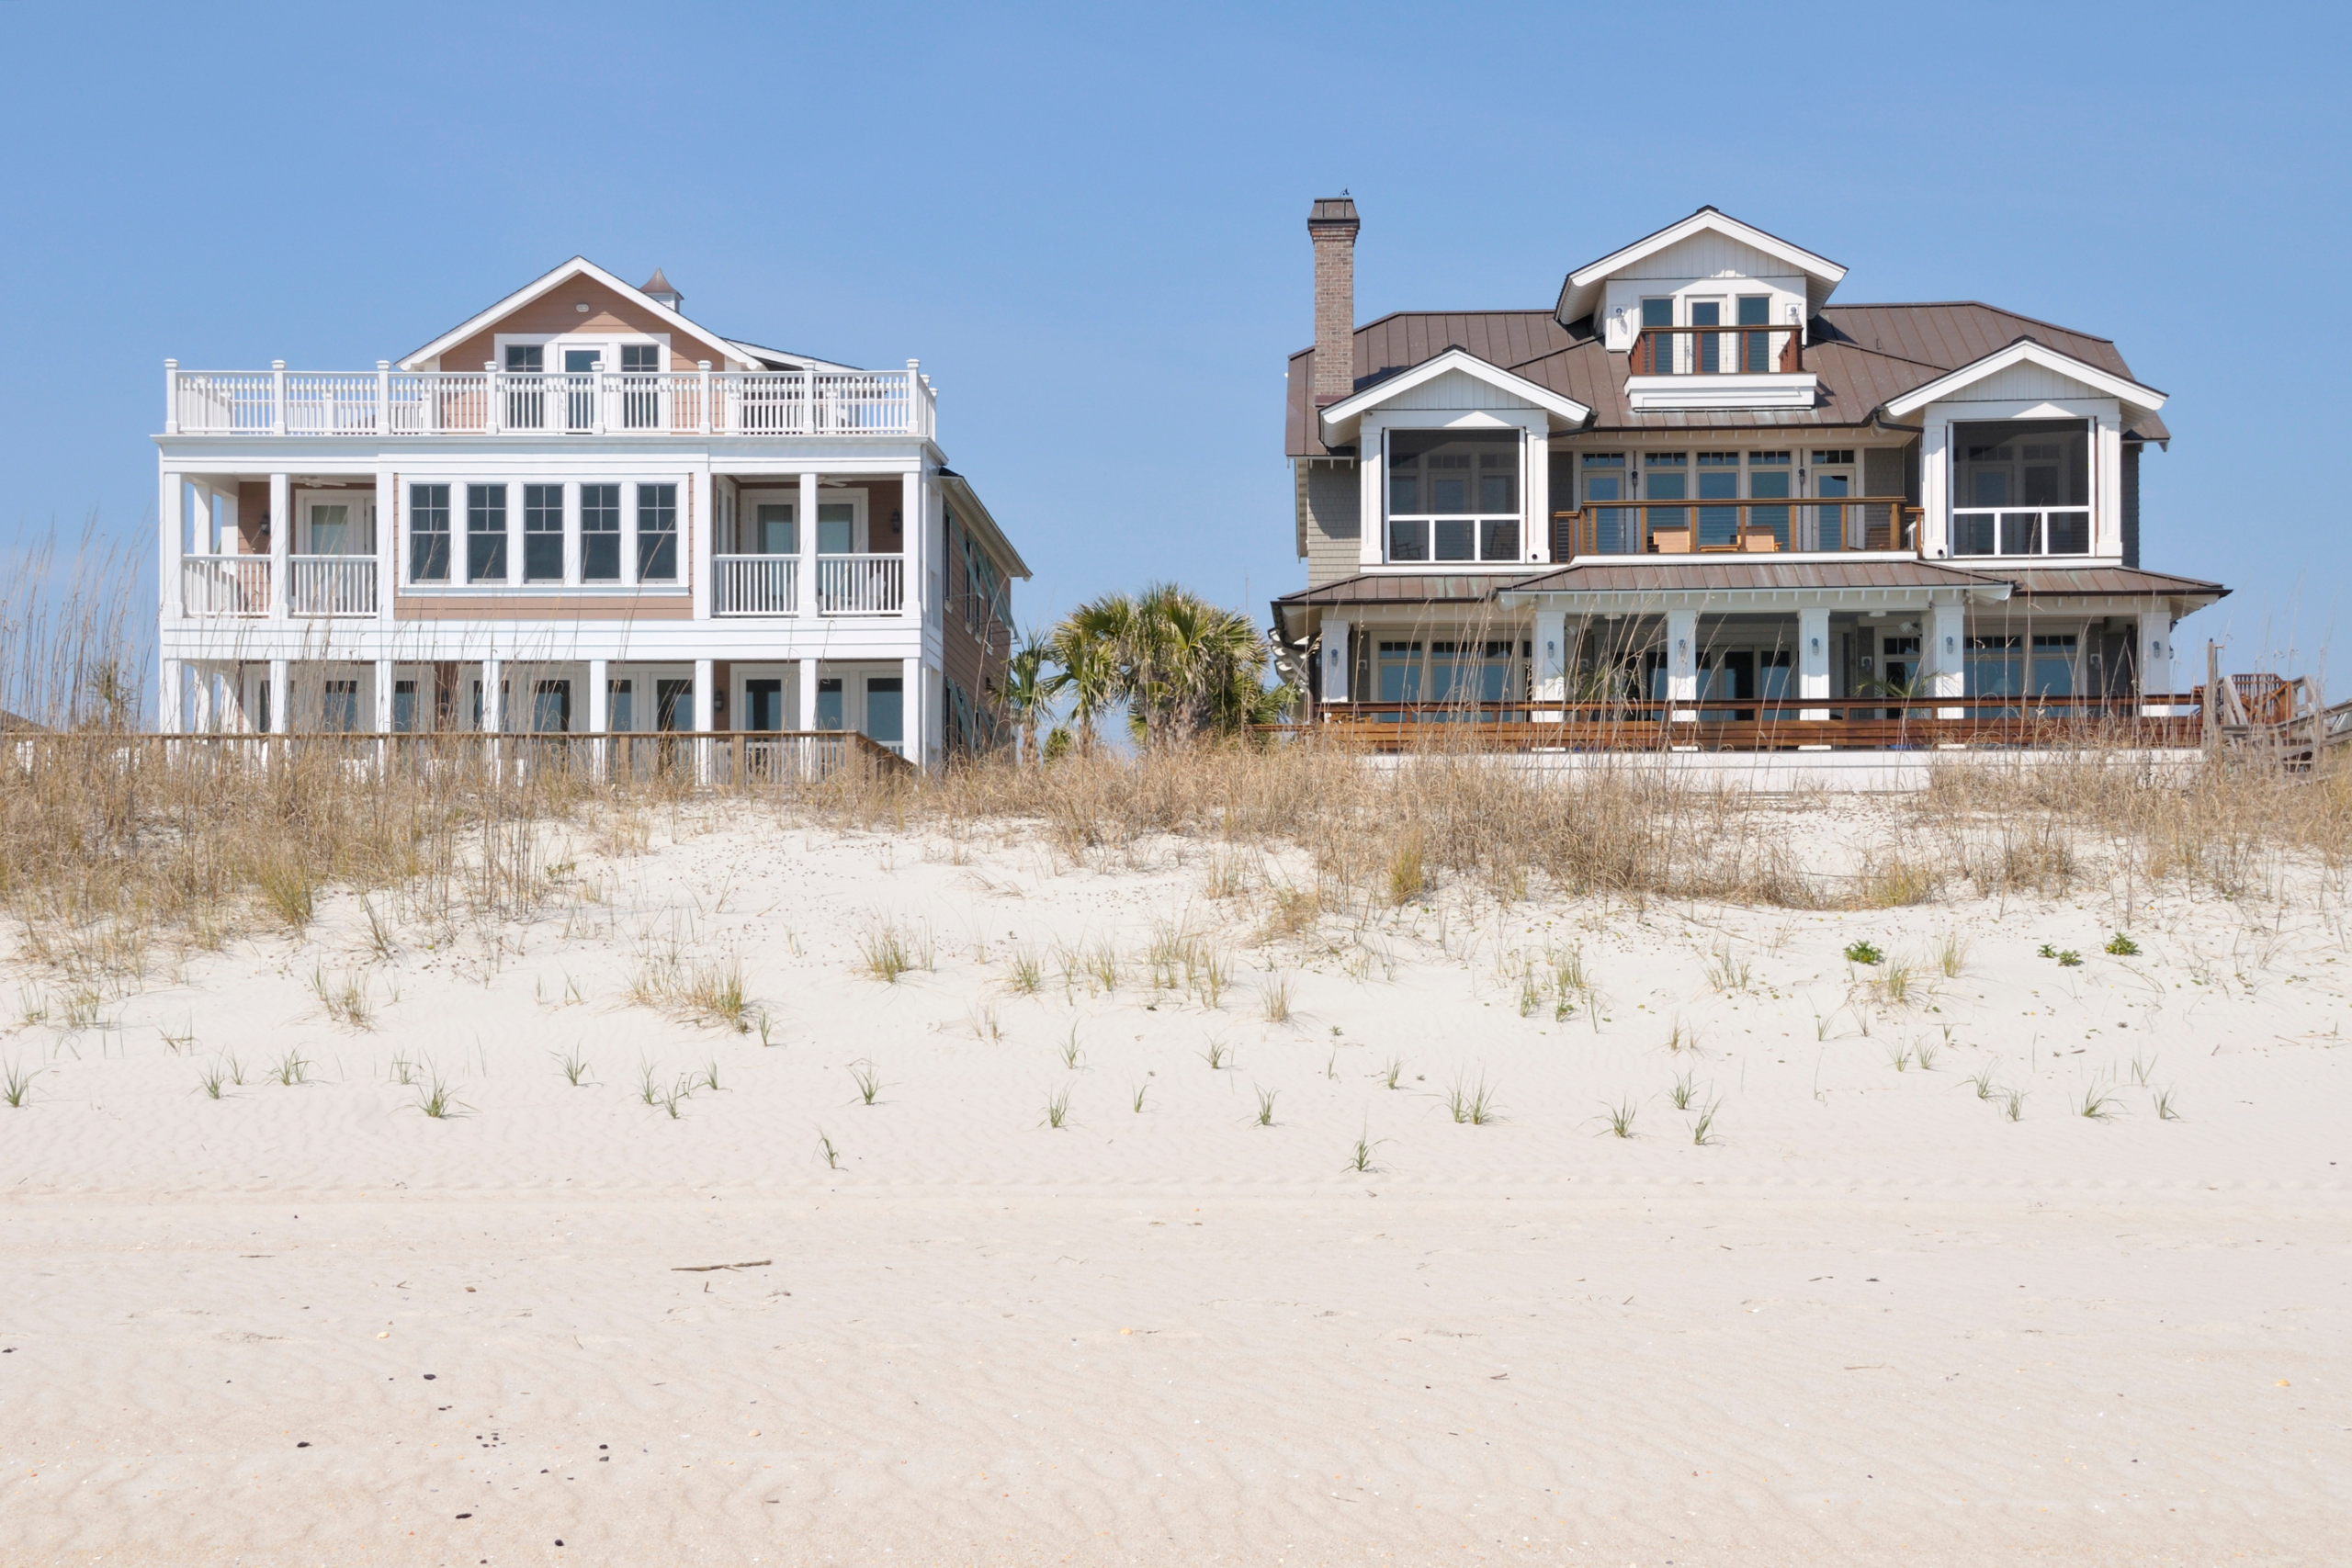 Two beachfront houses on a sandy dune with clear blue skies.